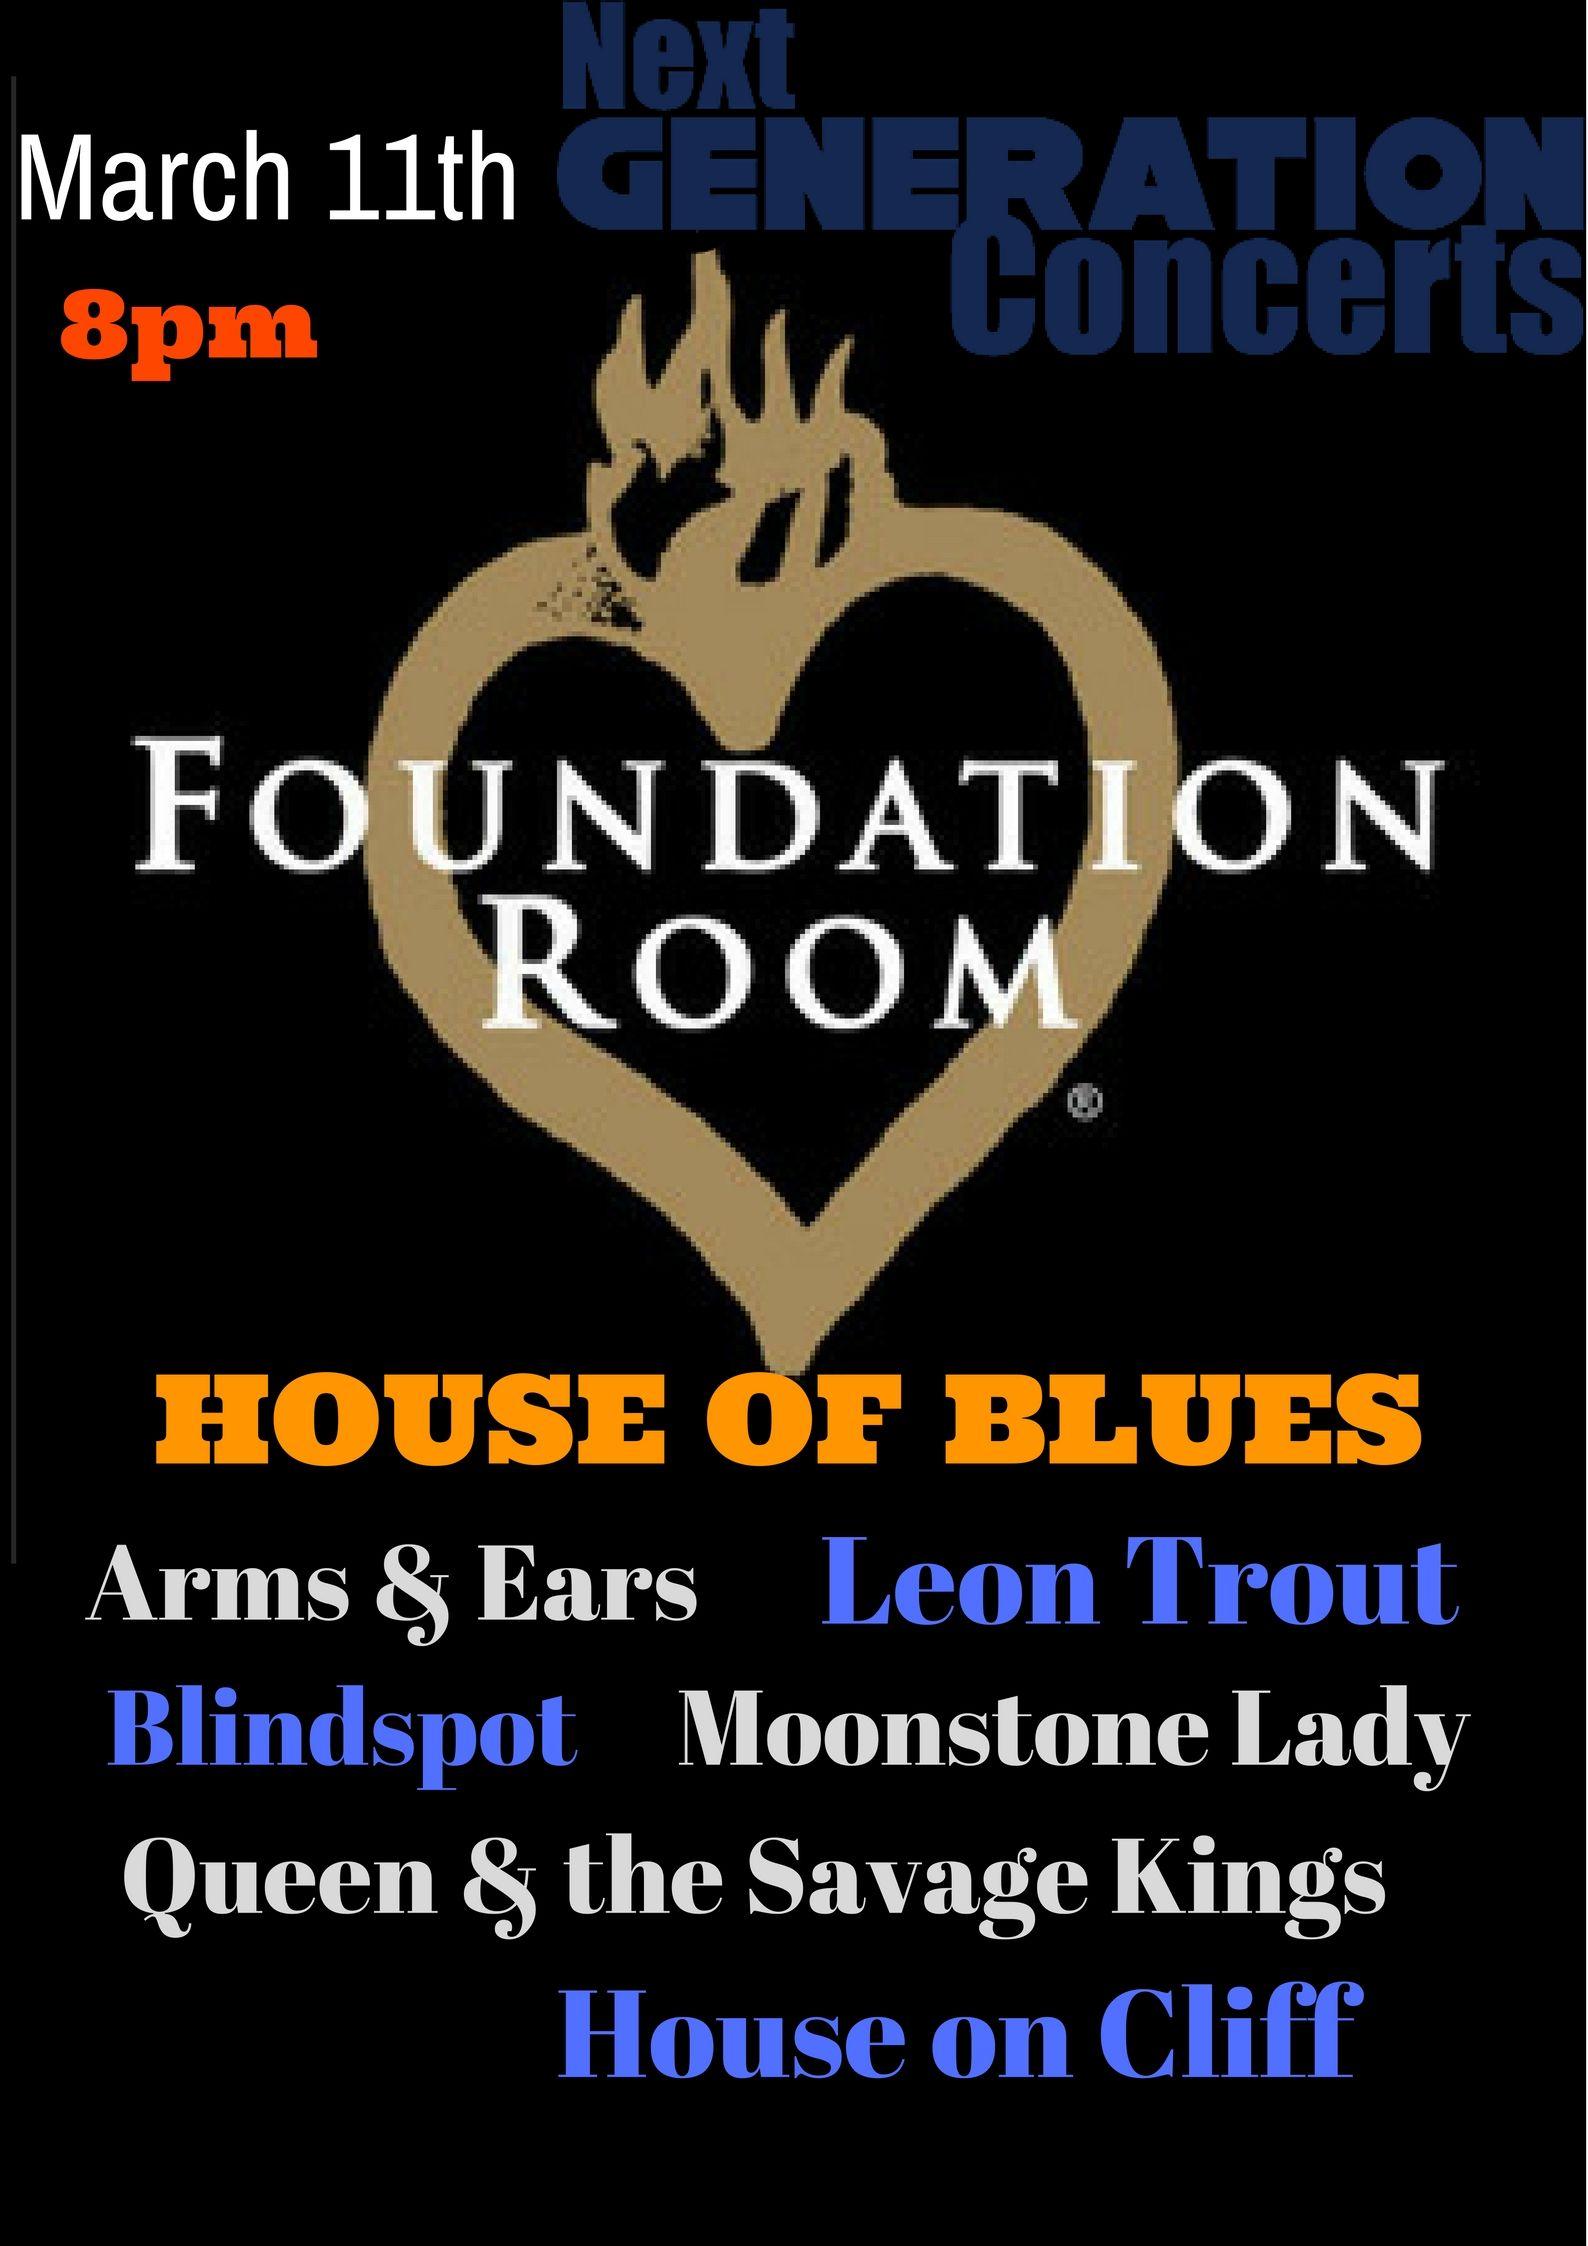 Queen and King Savage Logo - Live in the Foundation Room in The House of Blues. Next Generation ...